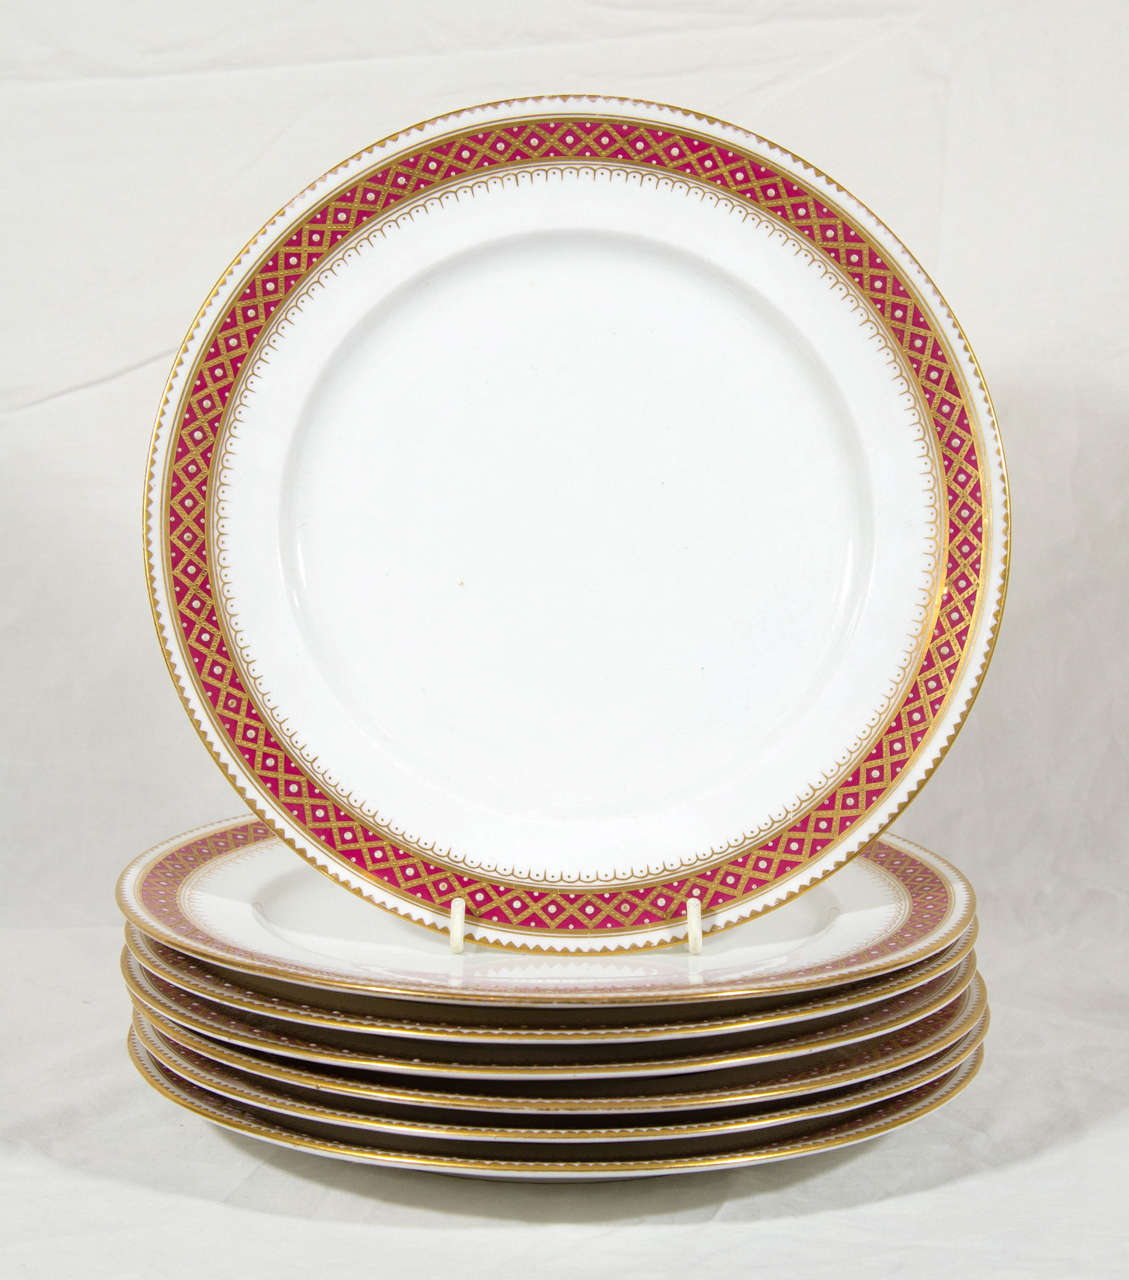 A set of a dozen 19th century Copeland dinner dishes with a red and gold jeweled border.